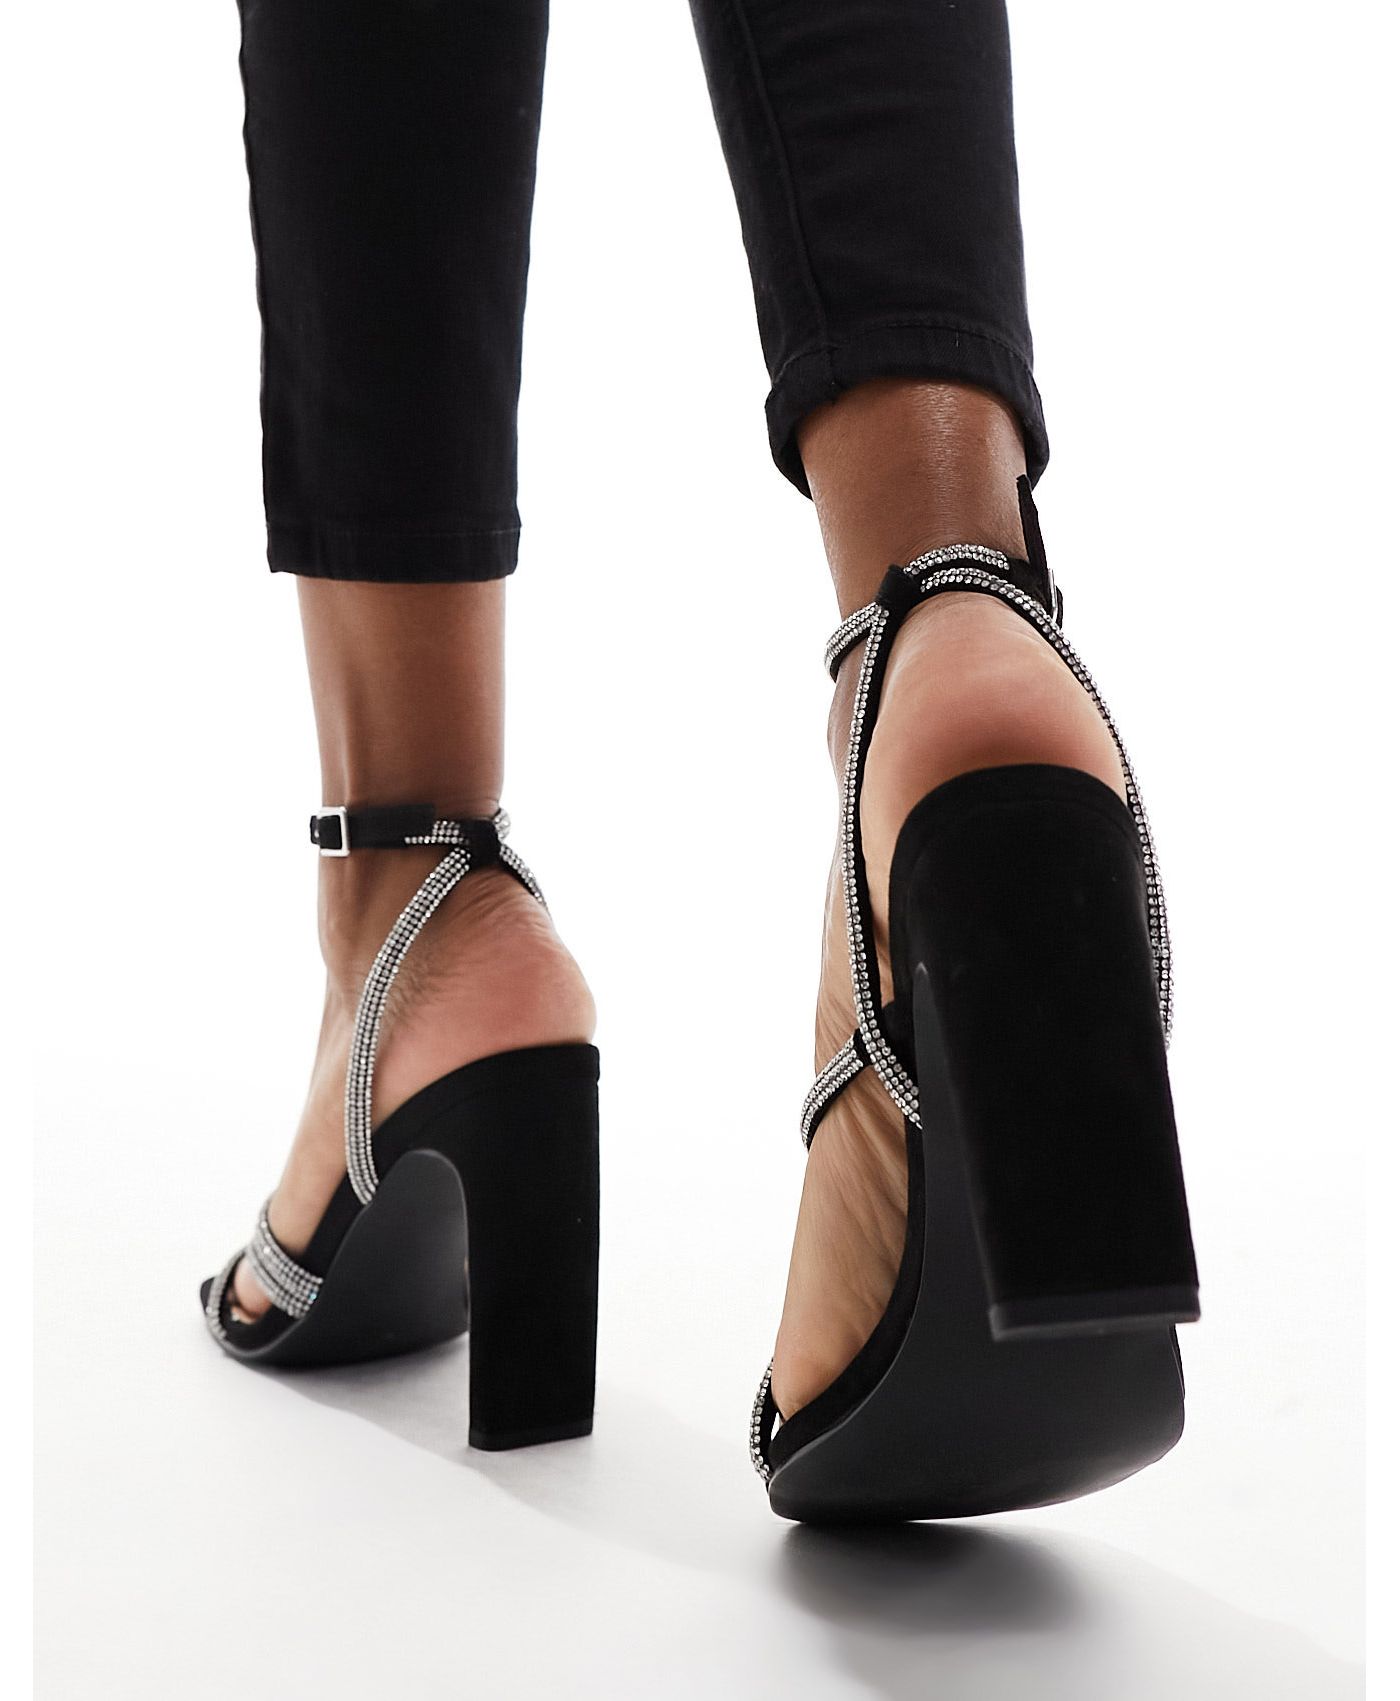 New Look strappy bling heeled sandal in black